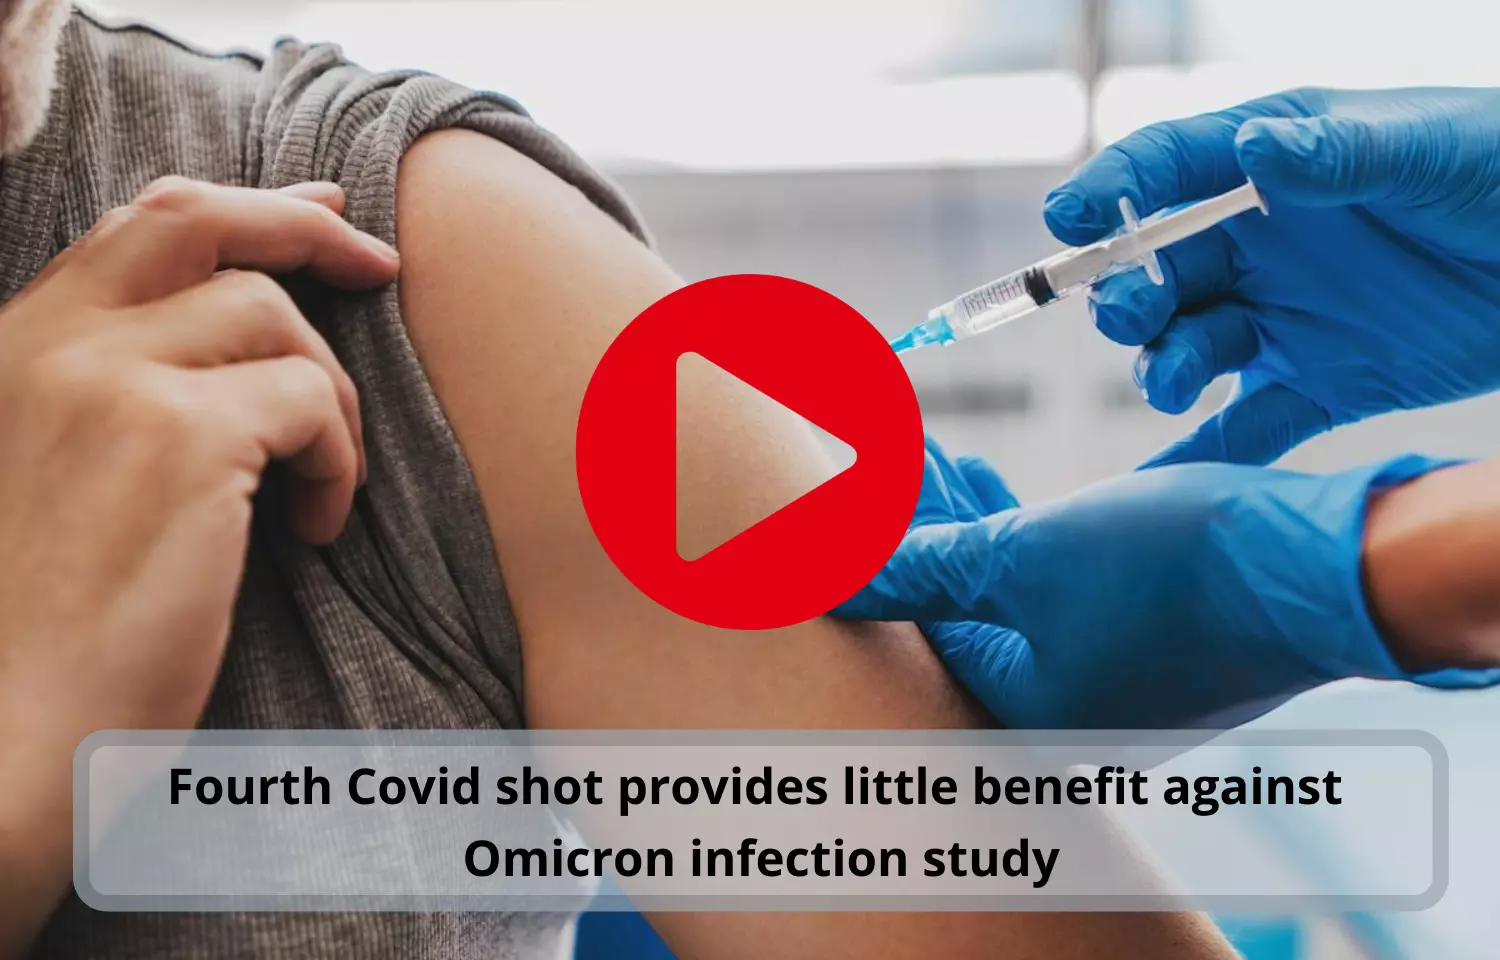 Fourth Covid shot to provide little benefit against Omicron infection